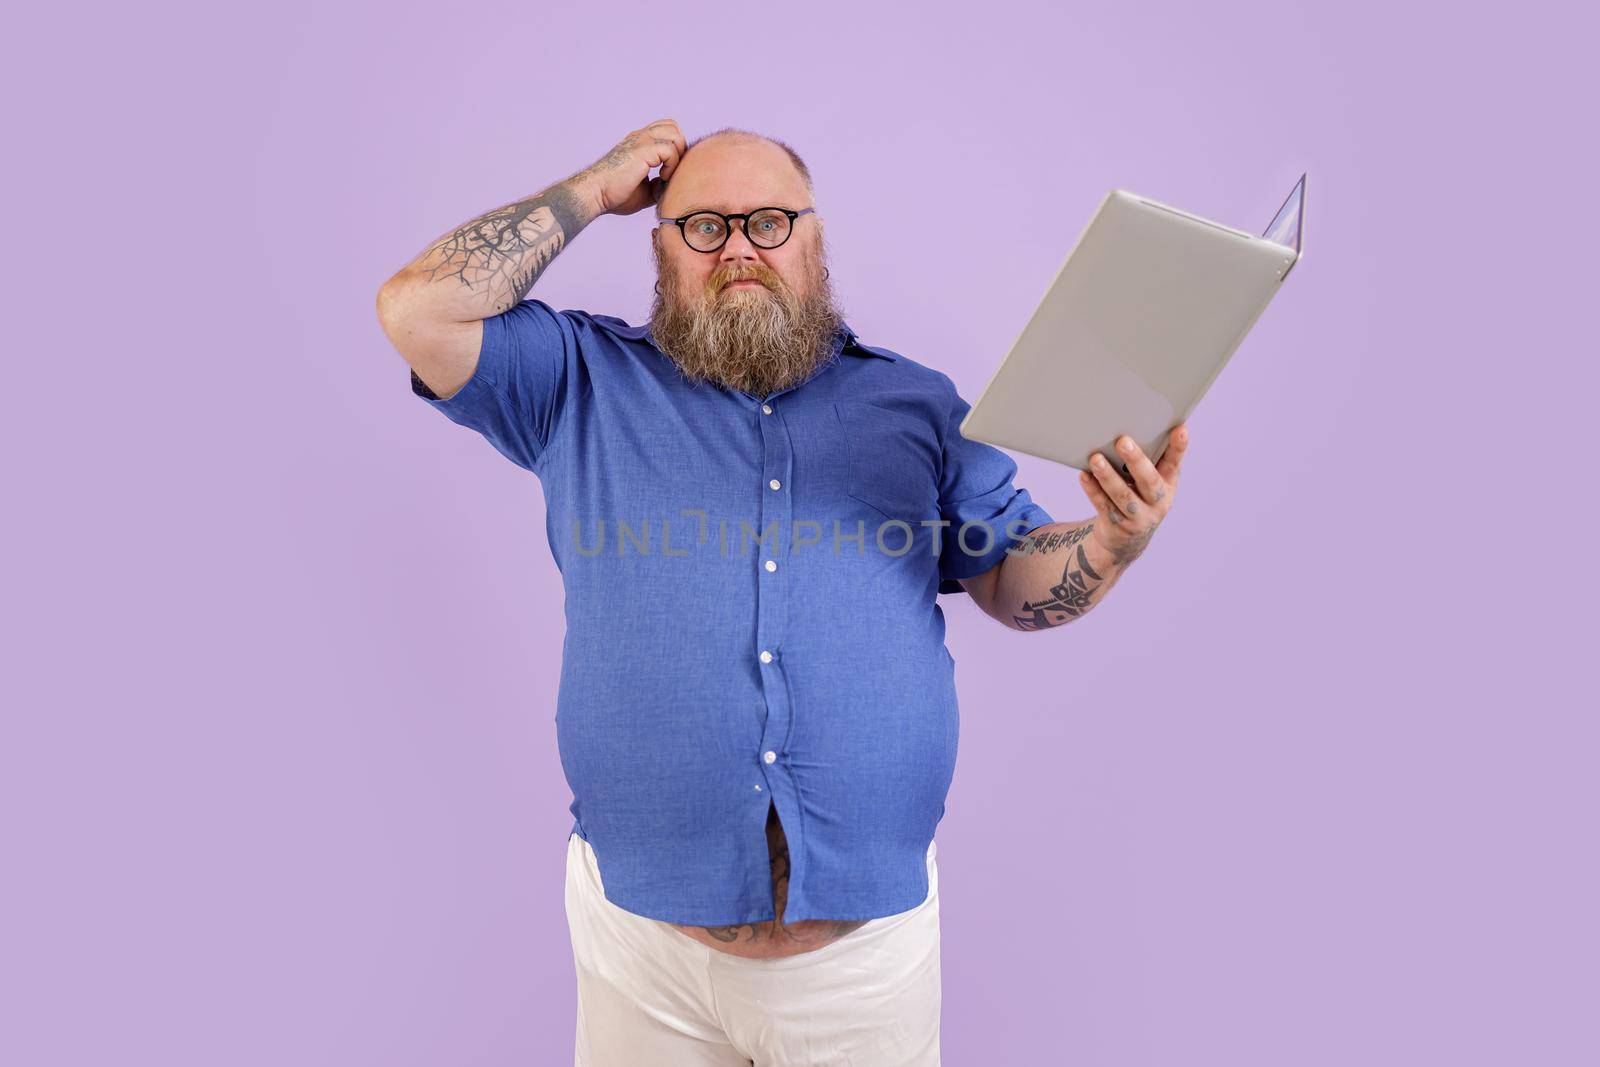 Doubting man with overweight shirt scratches head holding laptop as book on purple background by Yaroslav_astakhov